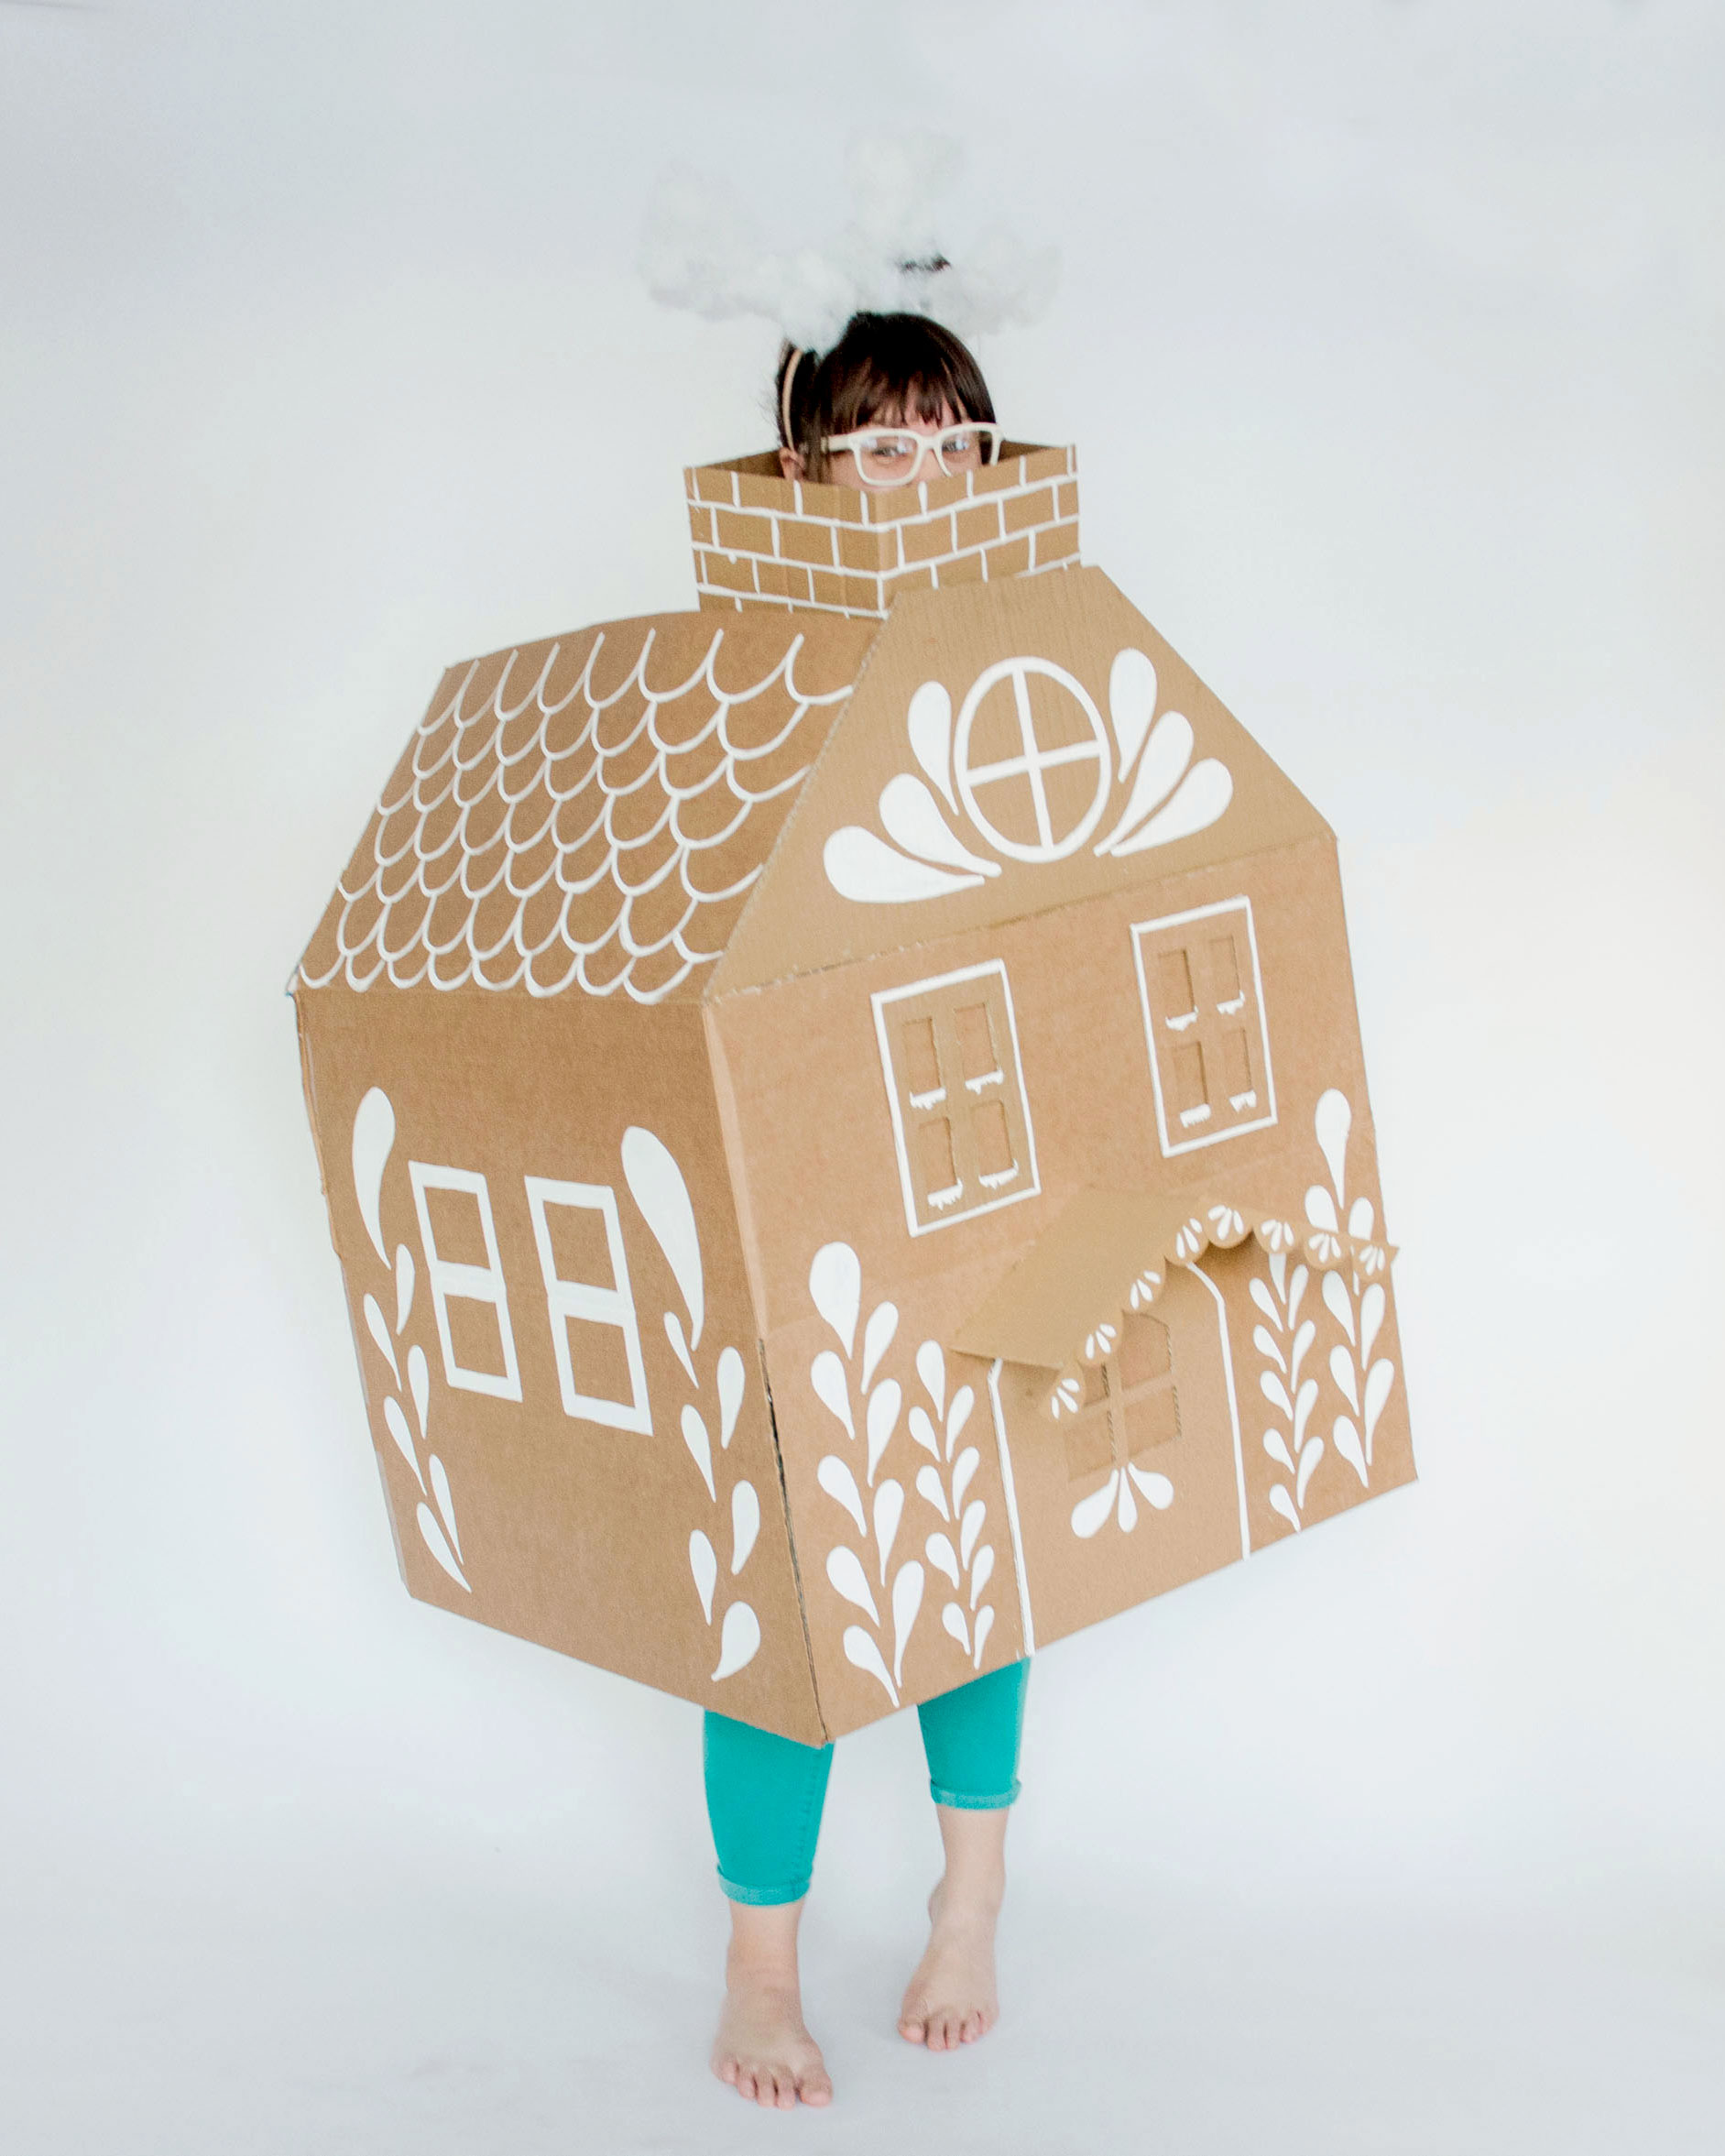 A DIY Gingerbread house costume